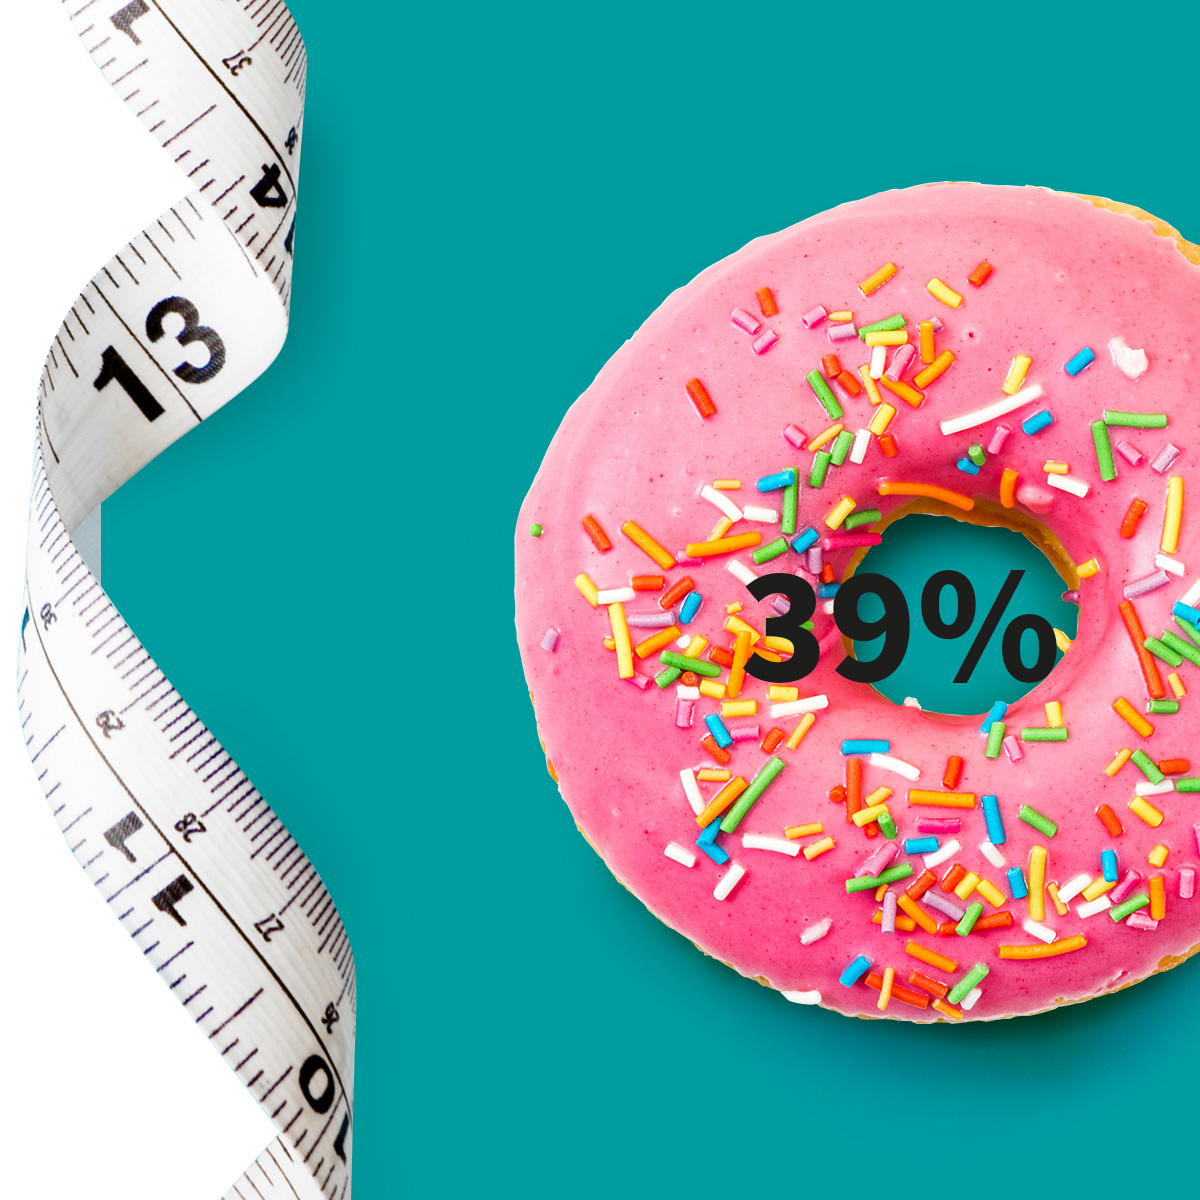 [.CO.UK-en United Kingdom (english)] •	A measuring tape and a doughnut with pink icing and colourful sugar sprinkle as a metaphor for obesity